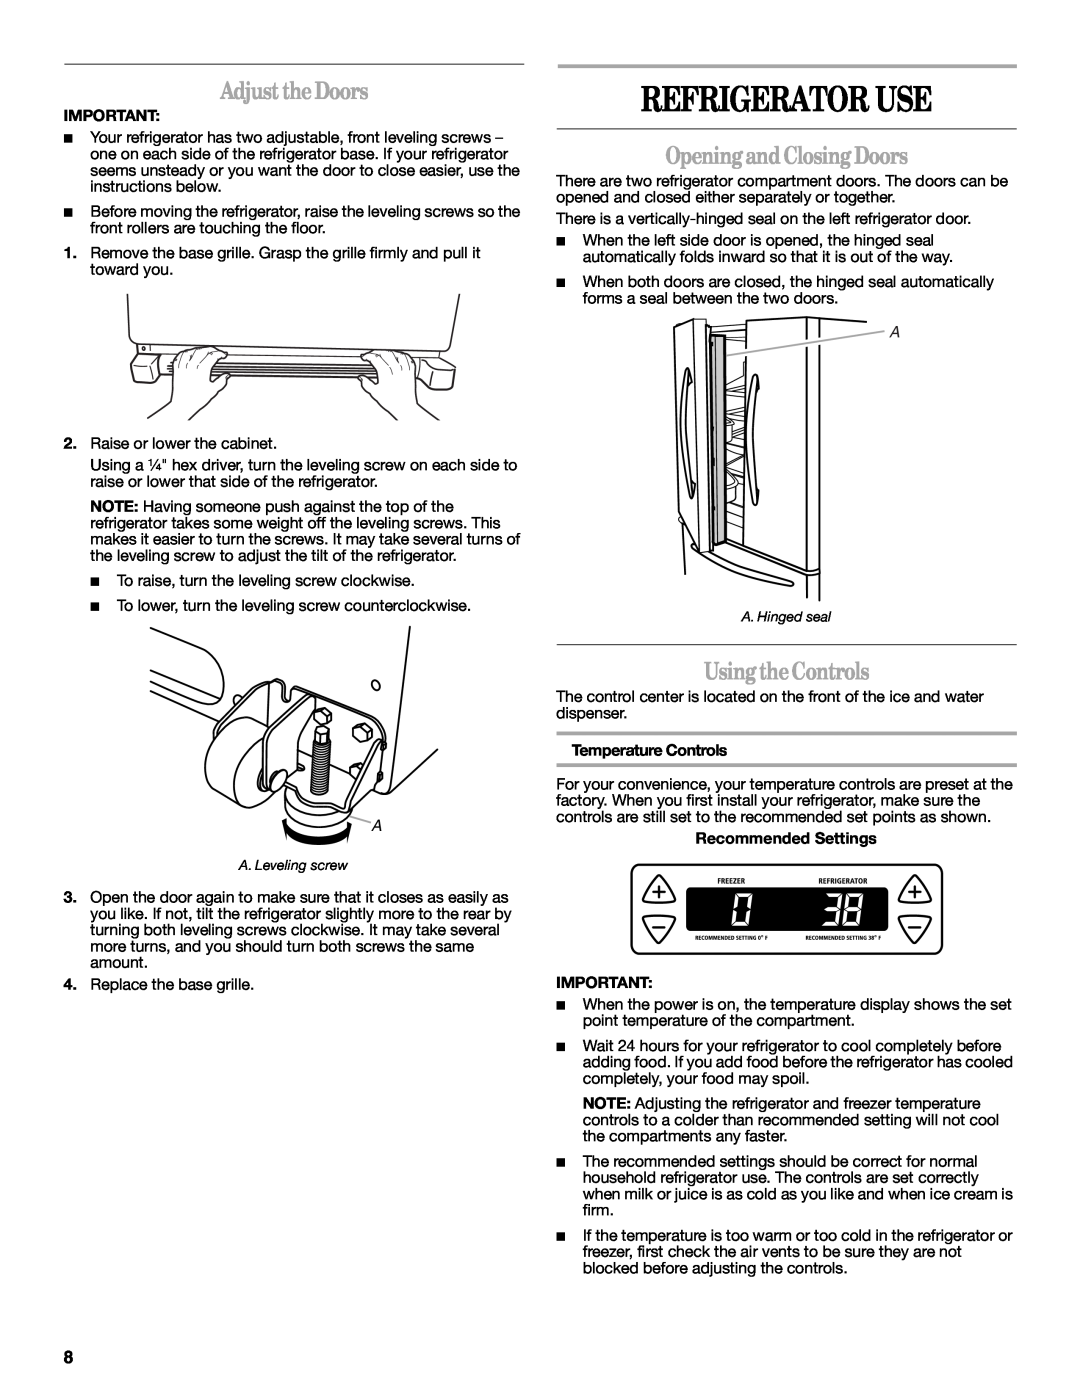 Whirlpool W10329360A Refrigerator Use, Adjust the Doors, Opening and Closing Doors, Using theControls 